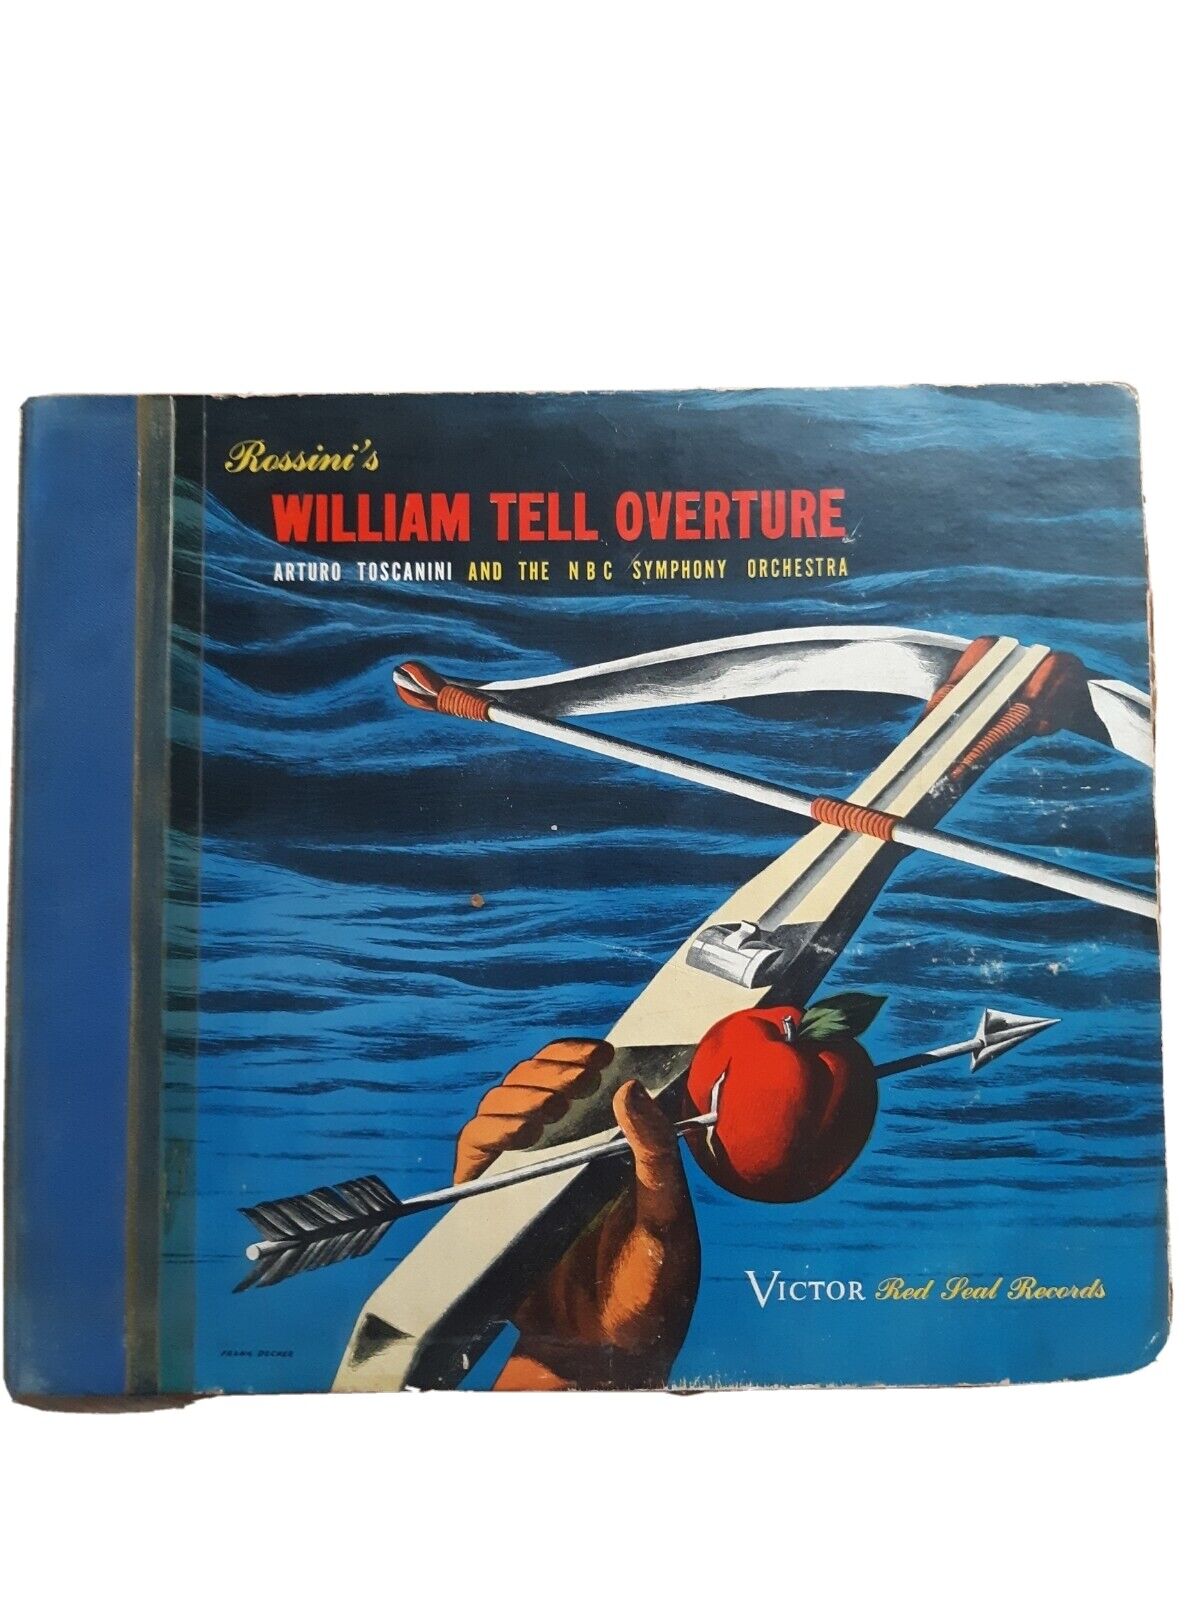 Rossini\'s William Tell Overture Record Toscanini and the NBC Symphony Orchestra